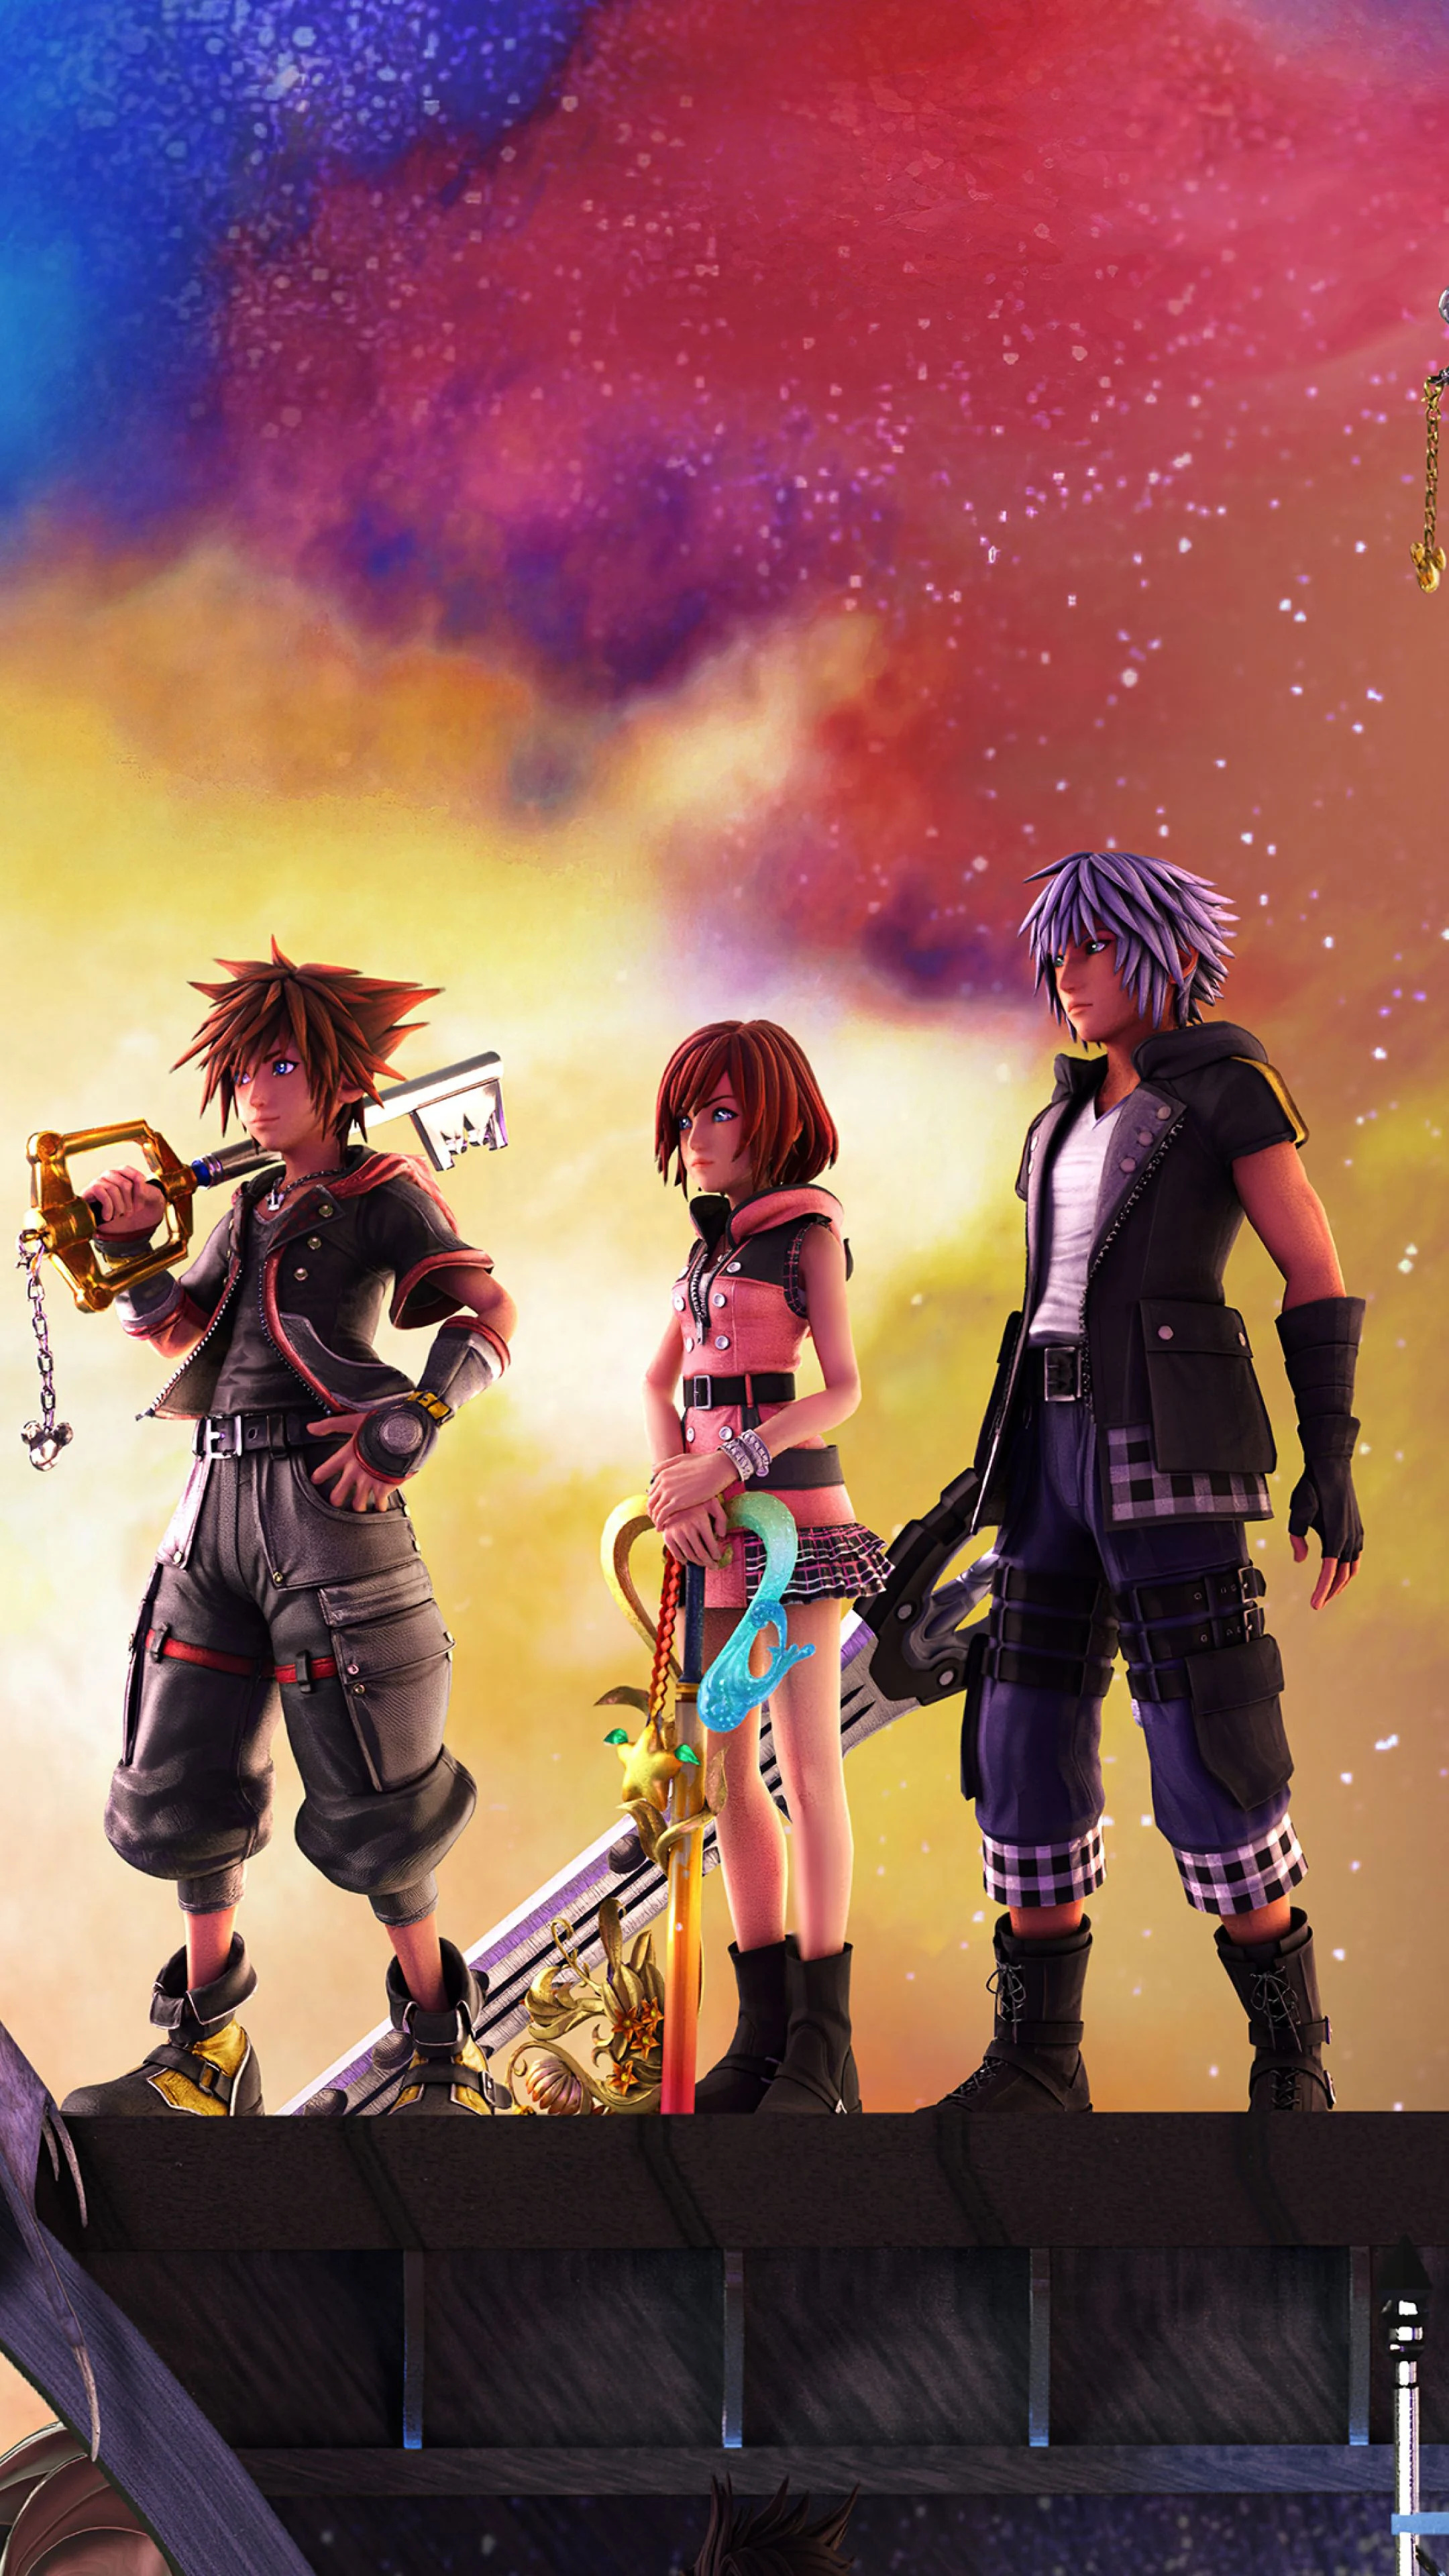 Kingdom Hearts mobile wallpapers, Sora and friends, Mobile gaming, Keyblade wielders, 2160x3840 4K Phone